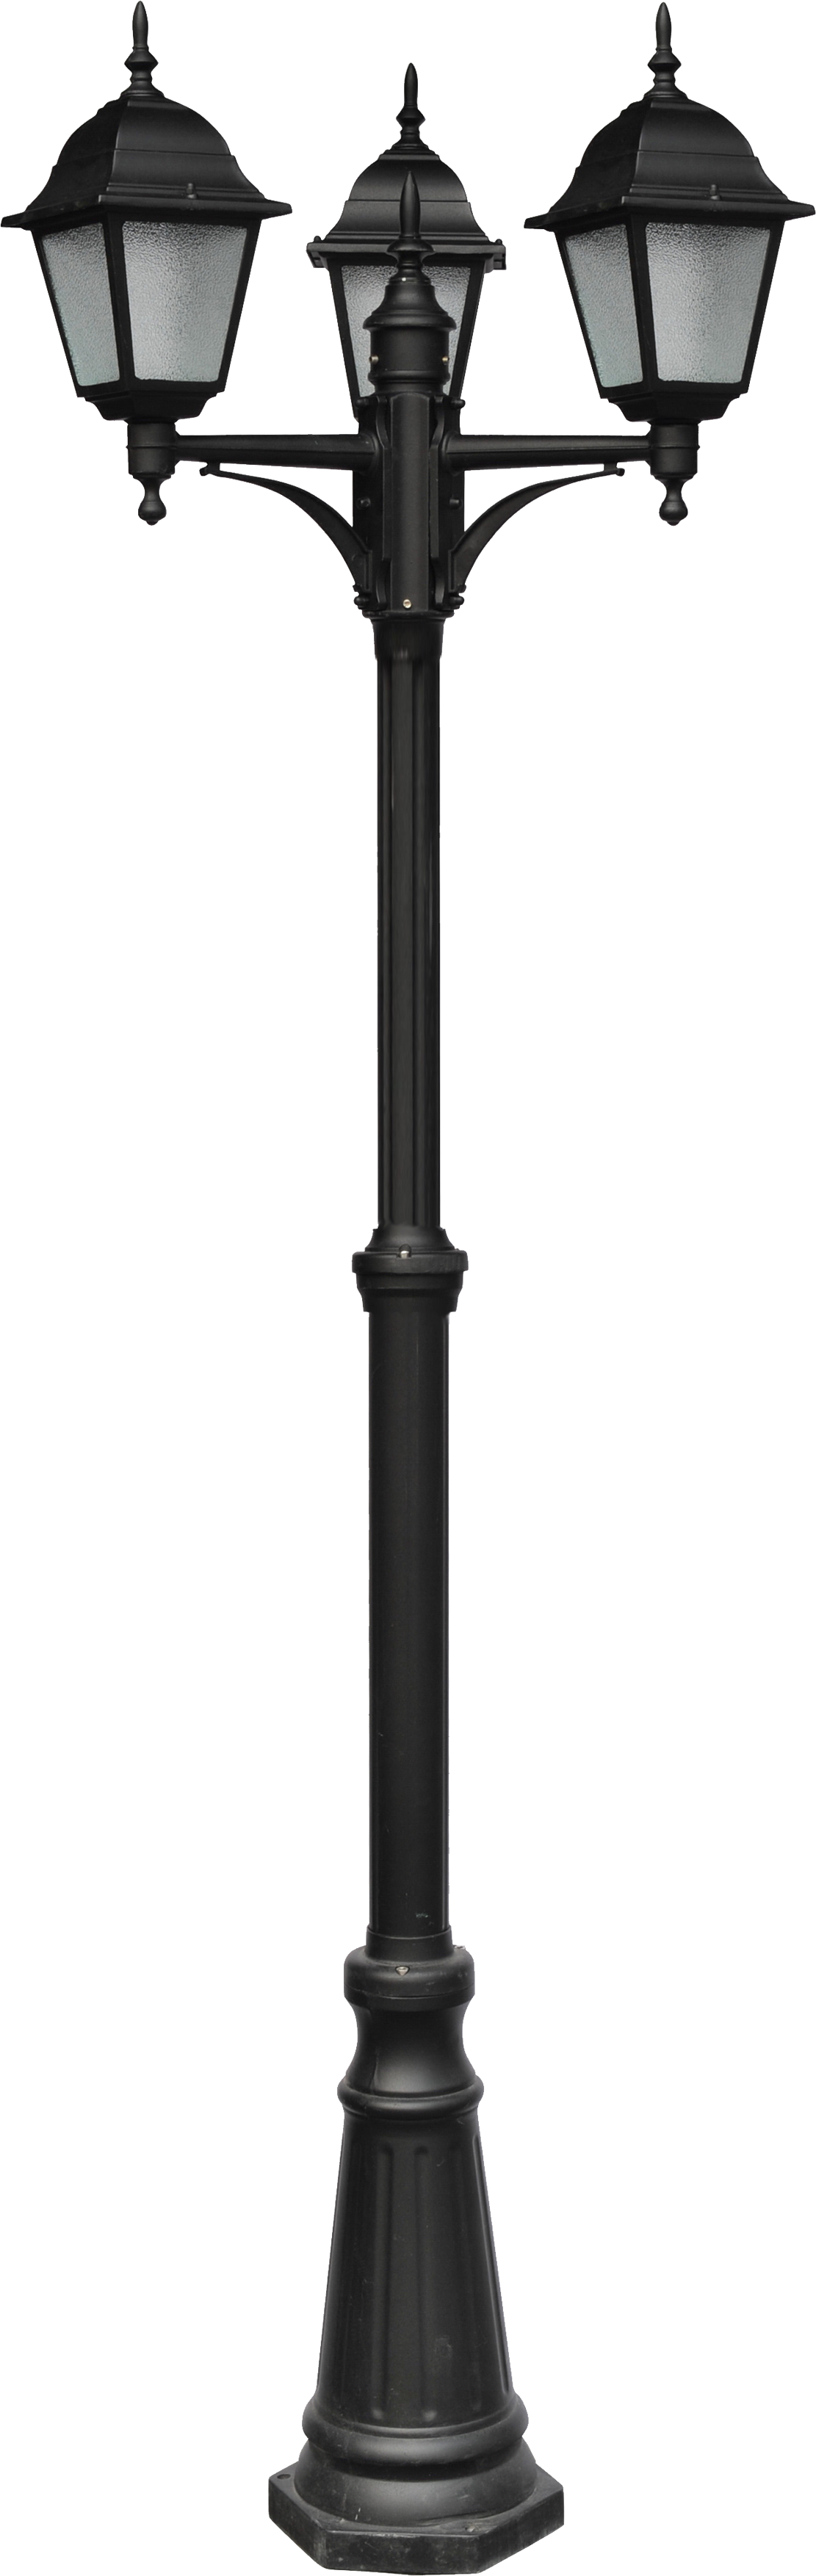 Street Light PNG Image for Free Download